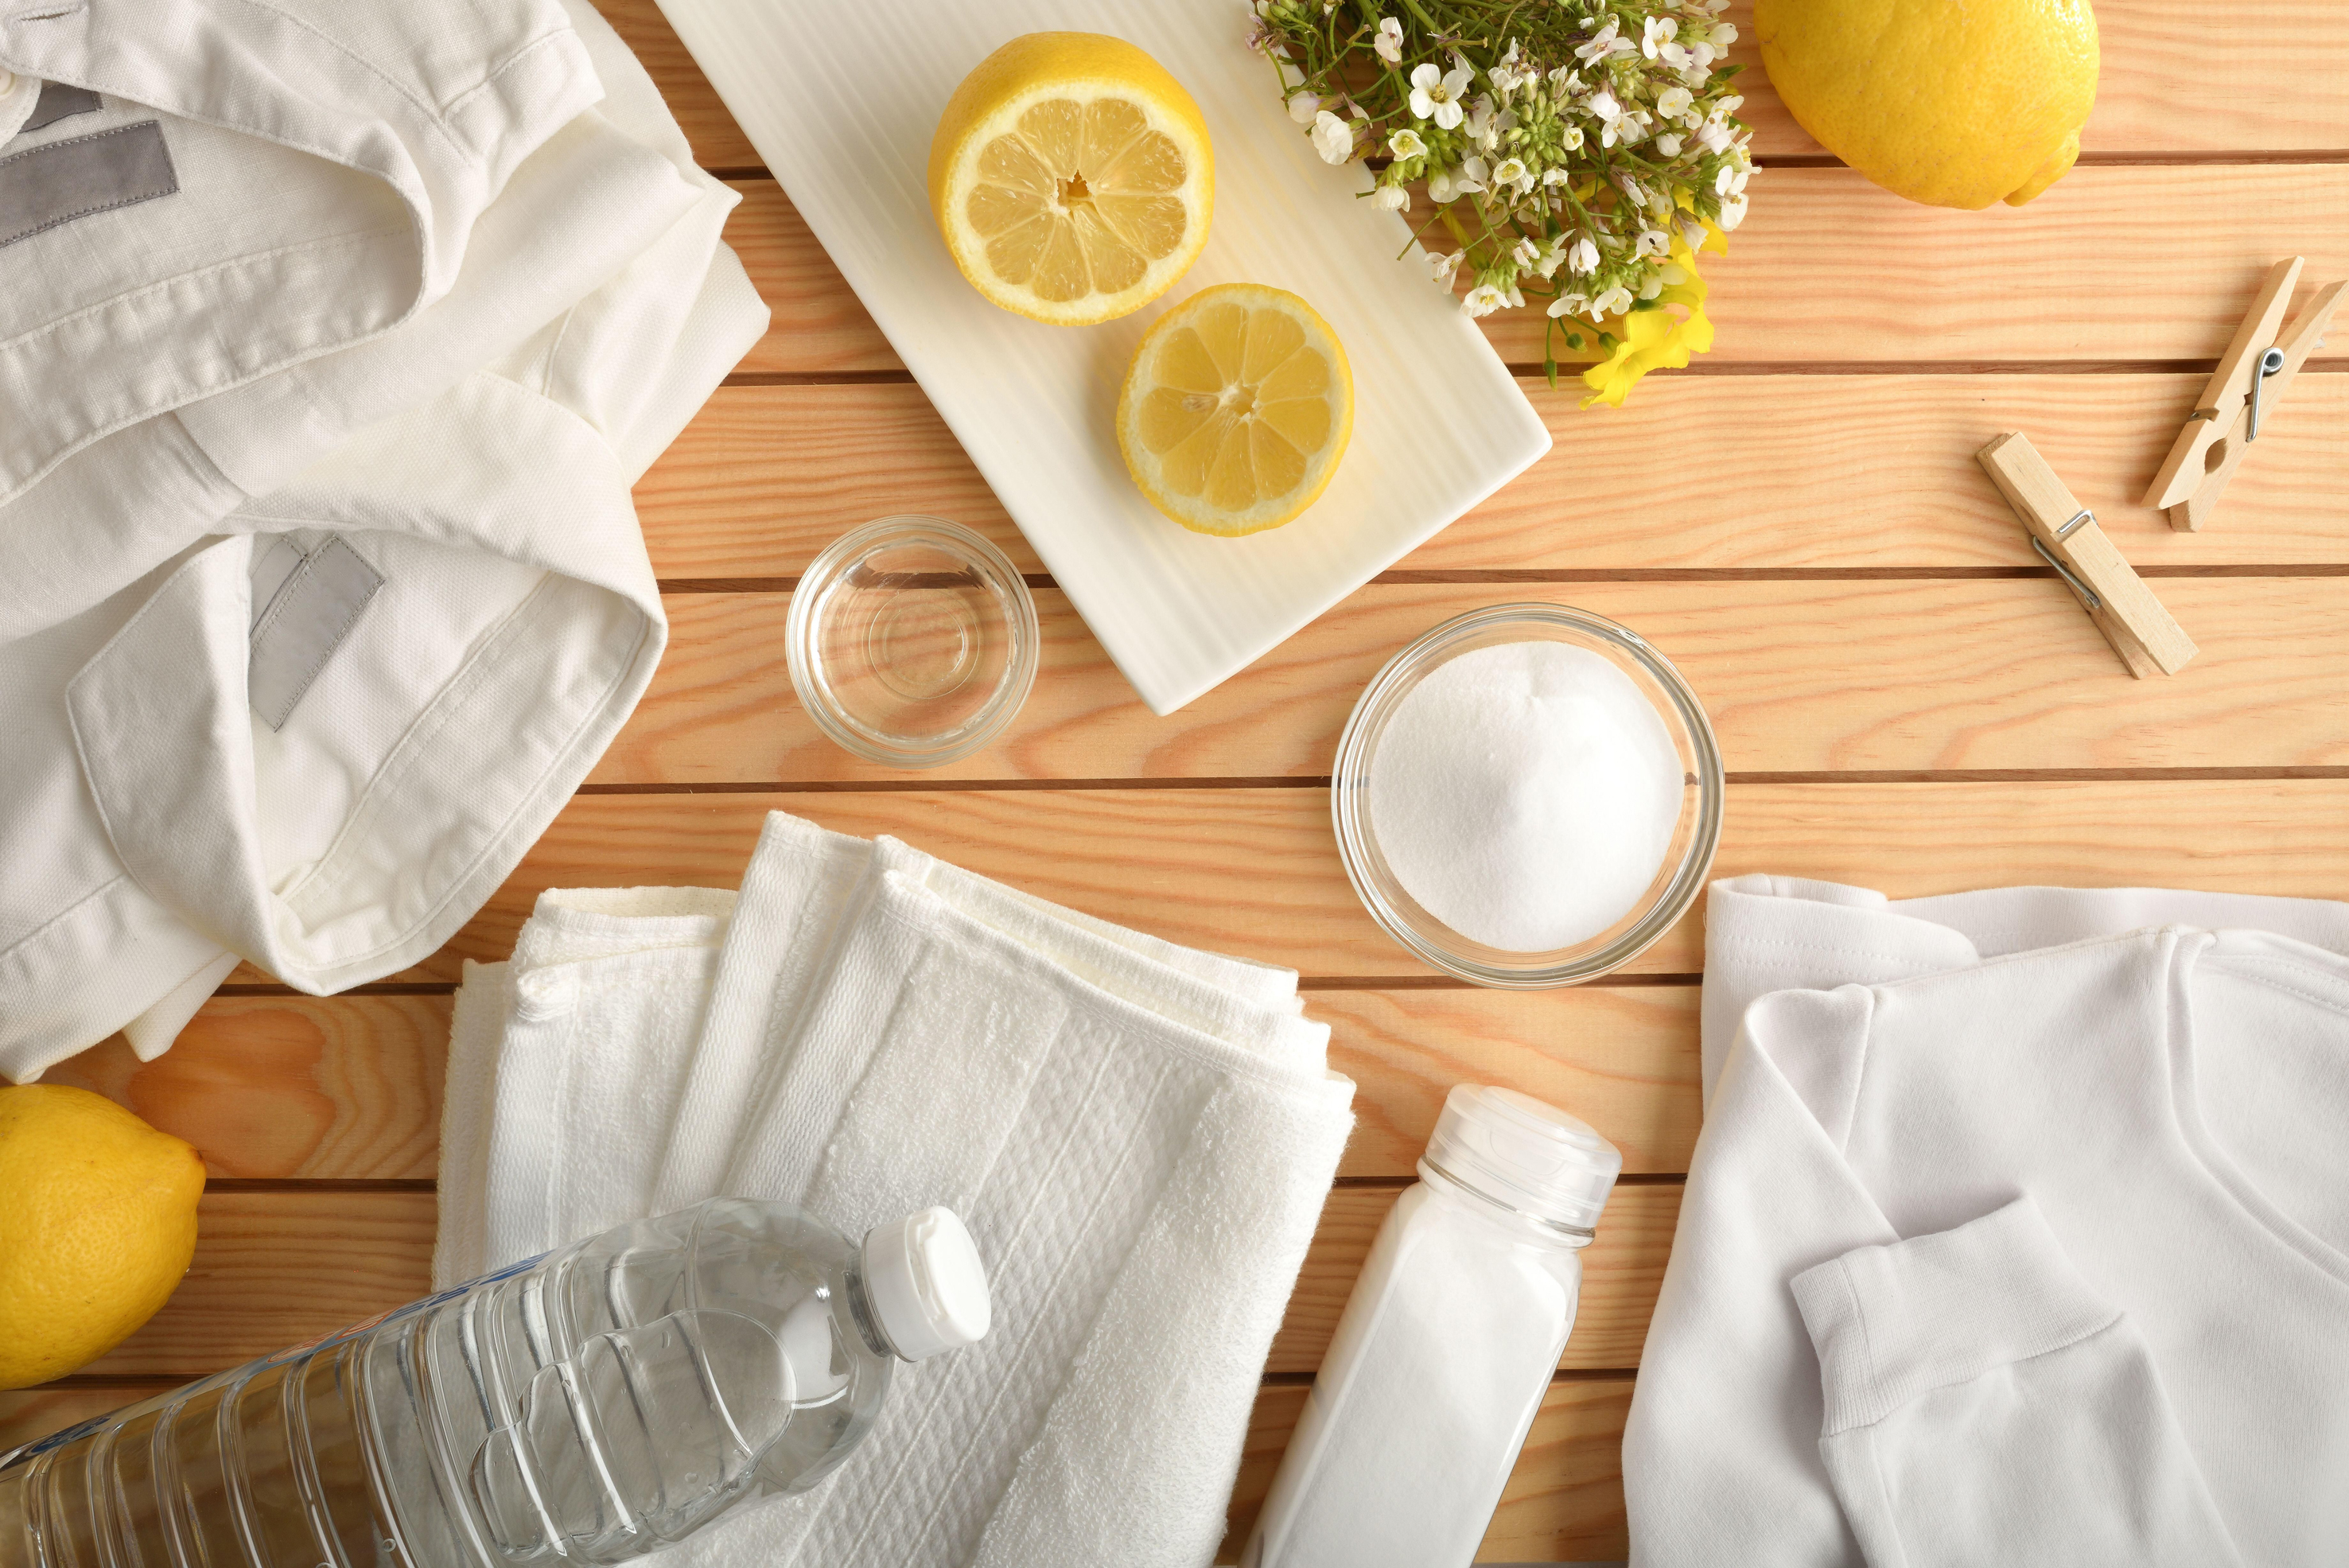 Home remedy for washing clothes in a sustainable and natural way with lemon, bicarbonate and vinegar